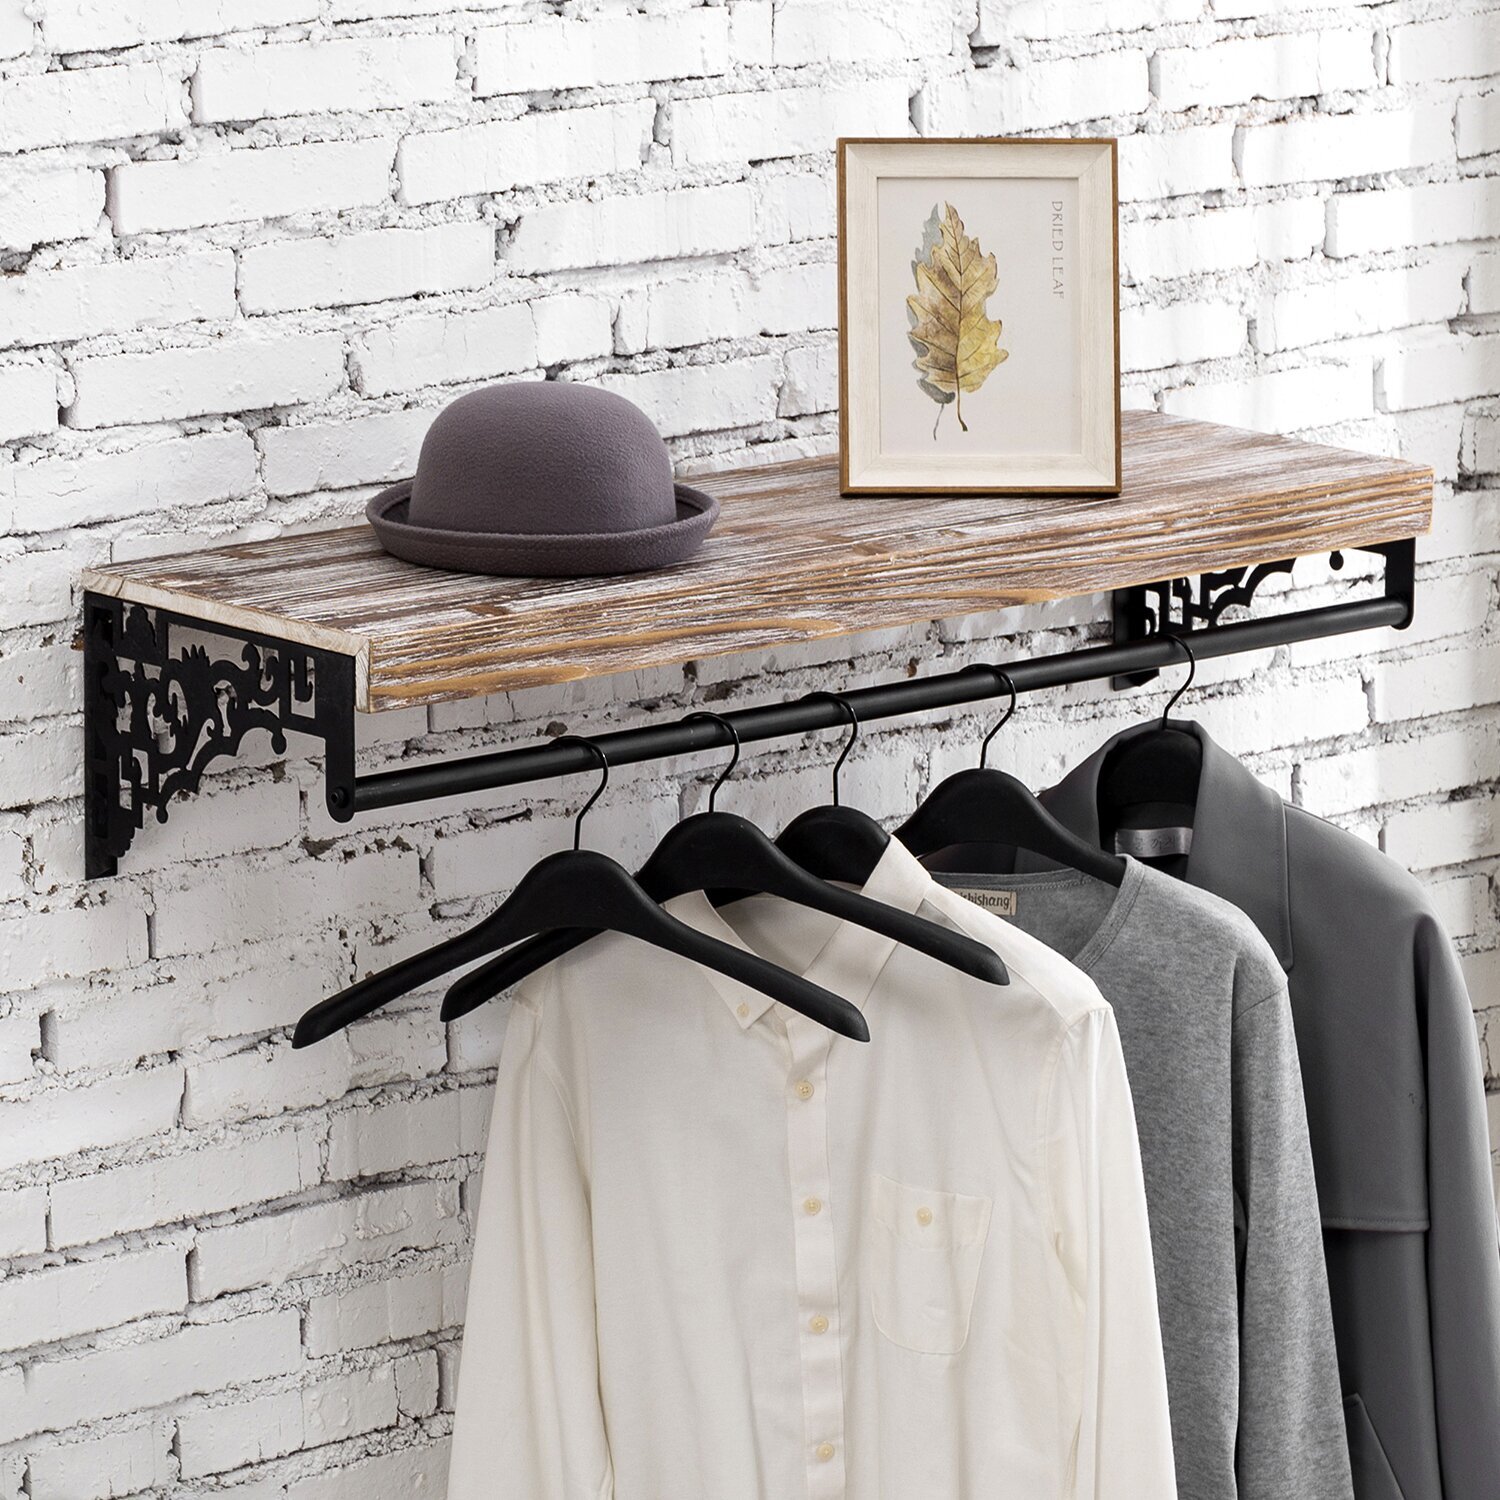 Decorative wooden shelf with wall hanger for clothes